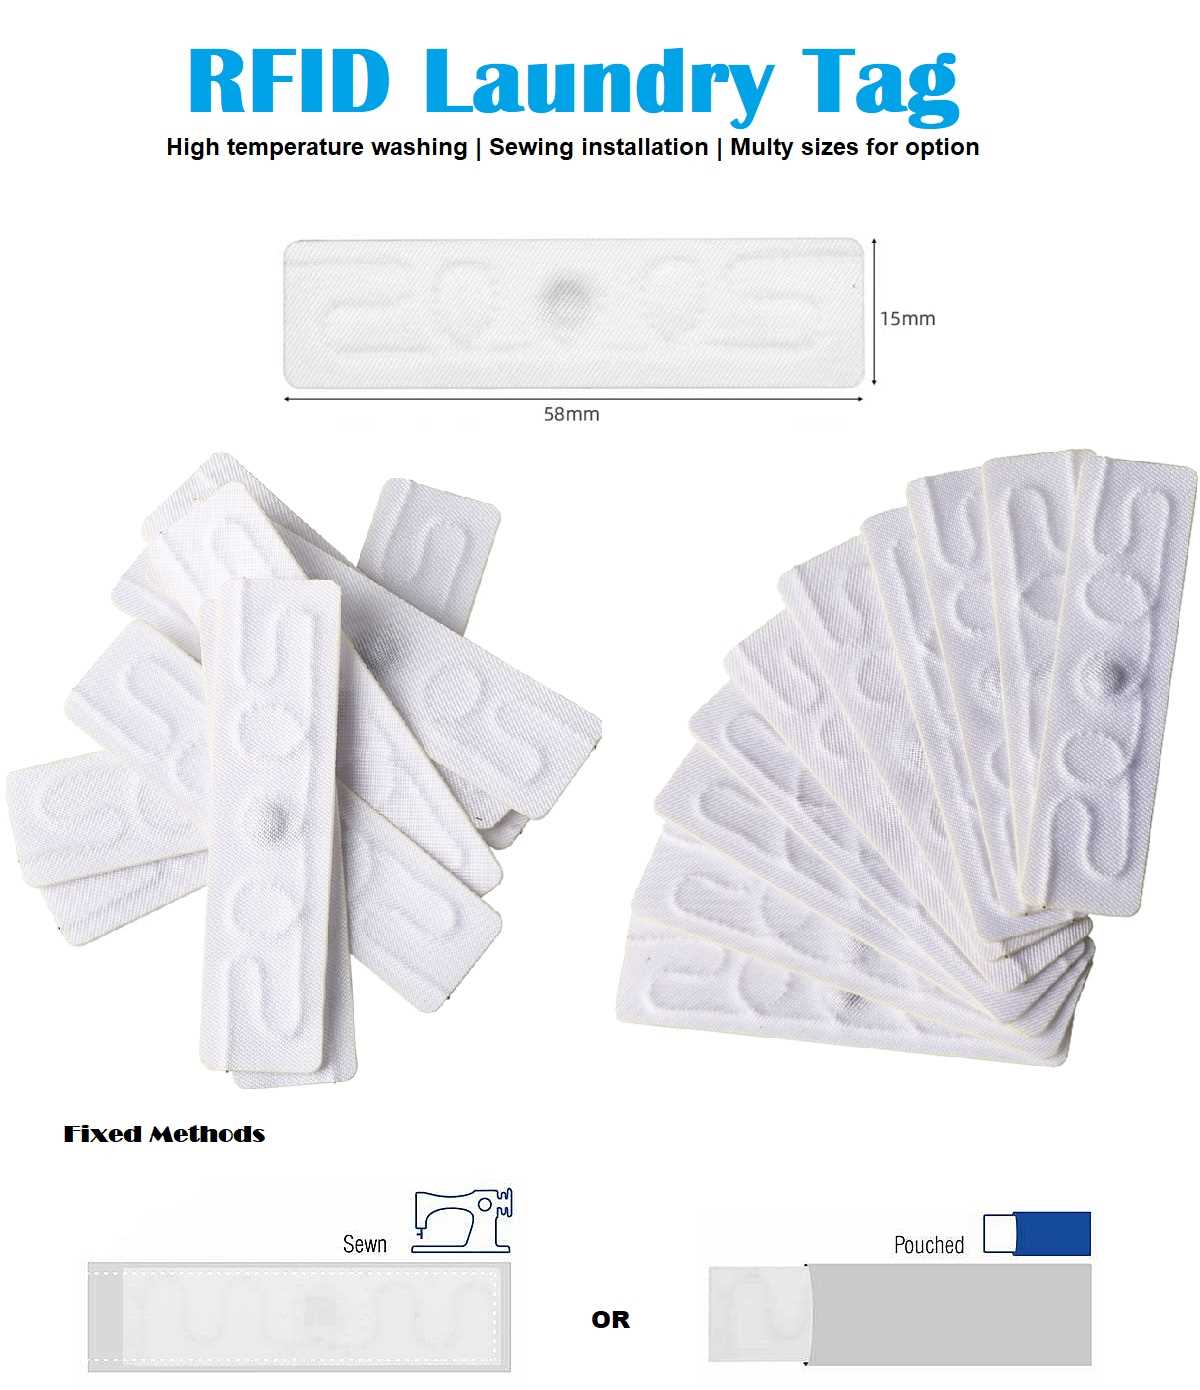 RFID soft laundry tags with R6p.jpg